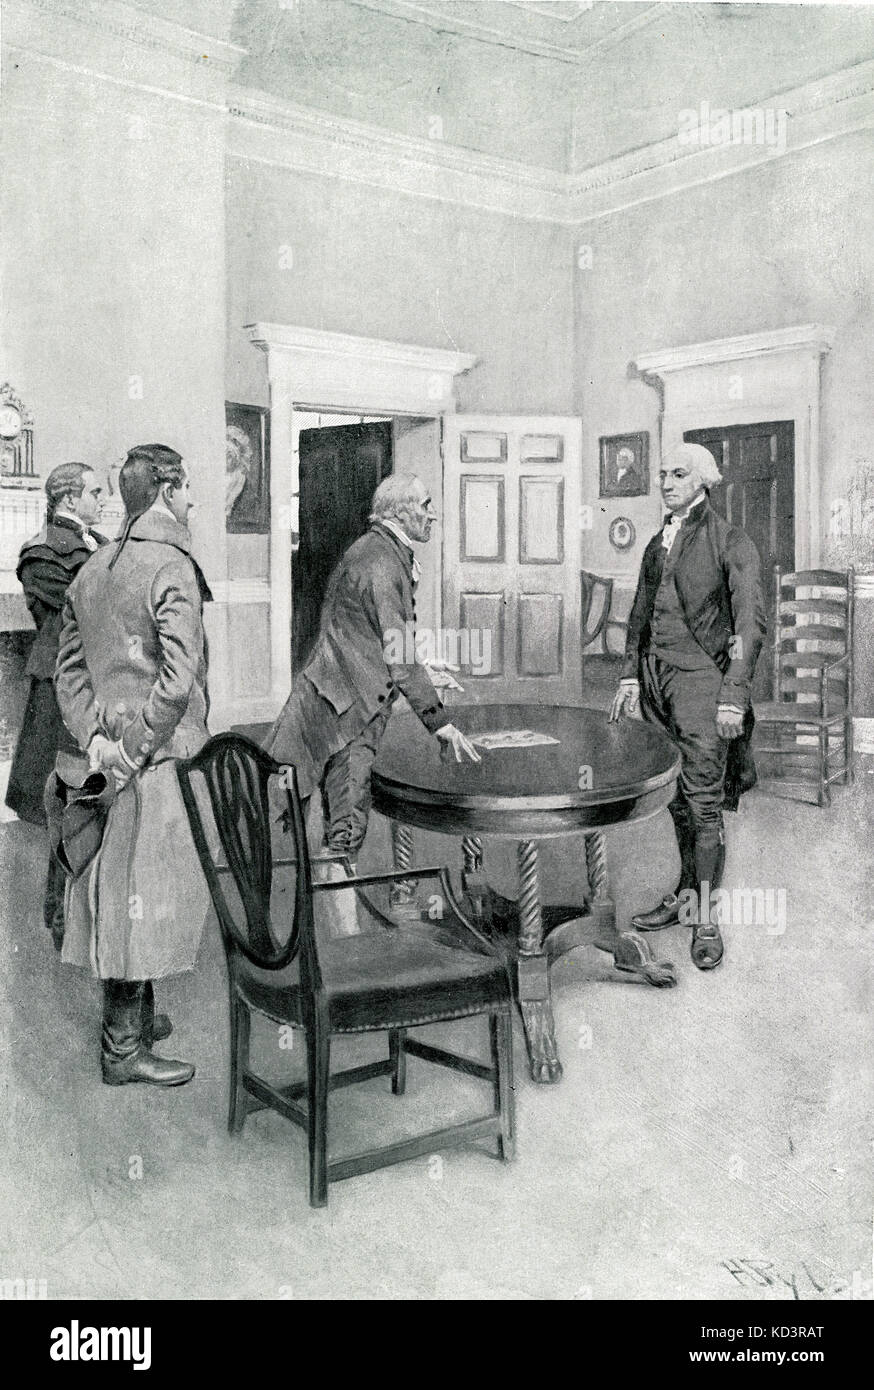 Charles Thompson announces to George Washington his election as the first President of the United States at Mount Vernon, 1789. Illustration by Howard Pyle, 1896 Stock Photo